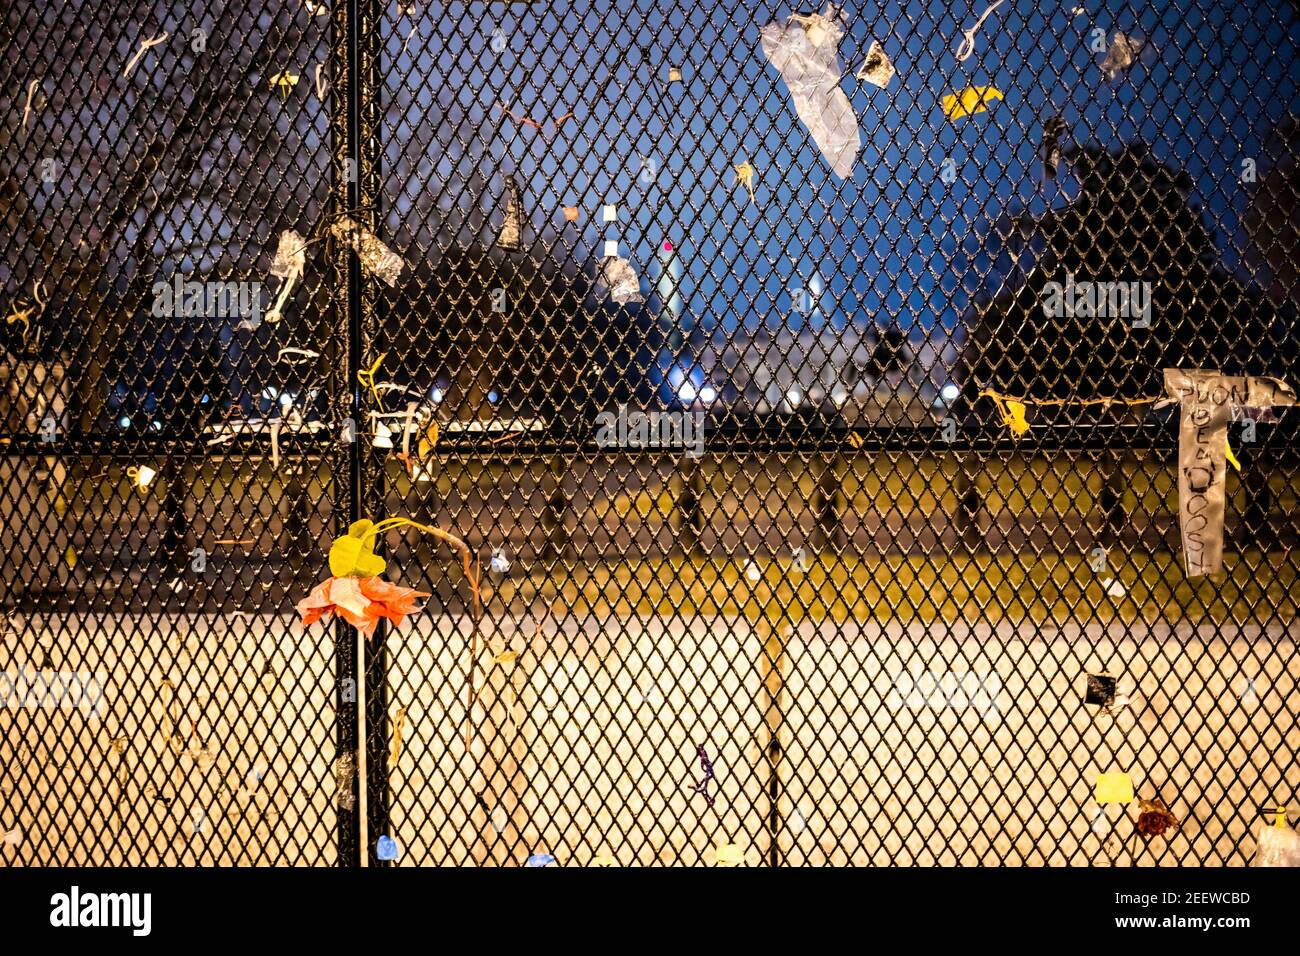 Security fence surrounds White house building after Capitol Hill riots, at night Stock Photo